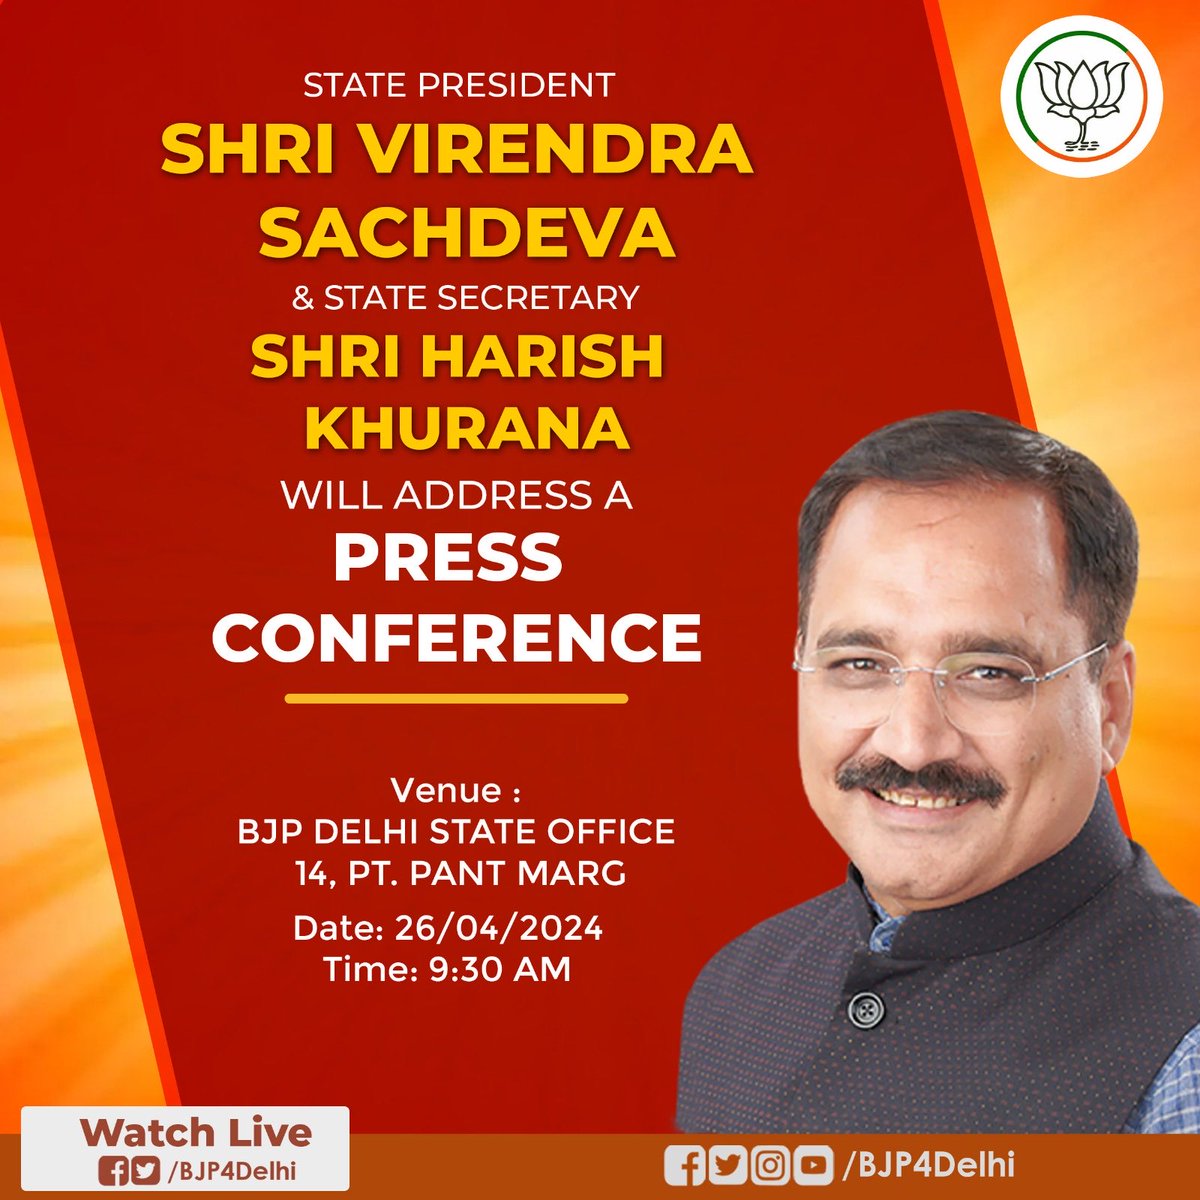 .@BJP4Delhi president @Virend_Sachdeva will expose lies of @ArvindKejriwal and his govt at 9:30am today. Stay tuned .